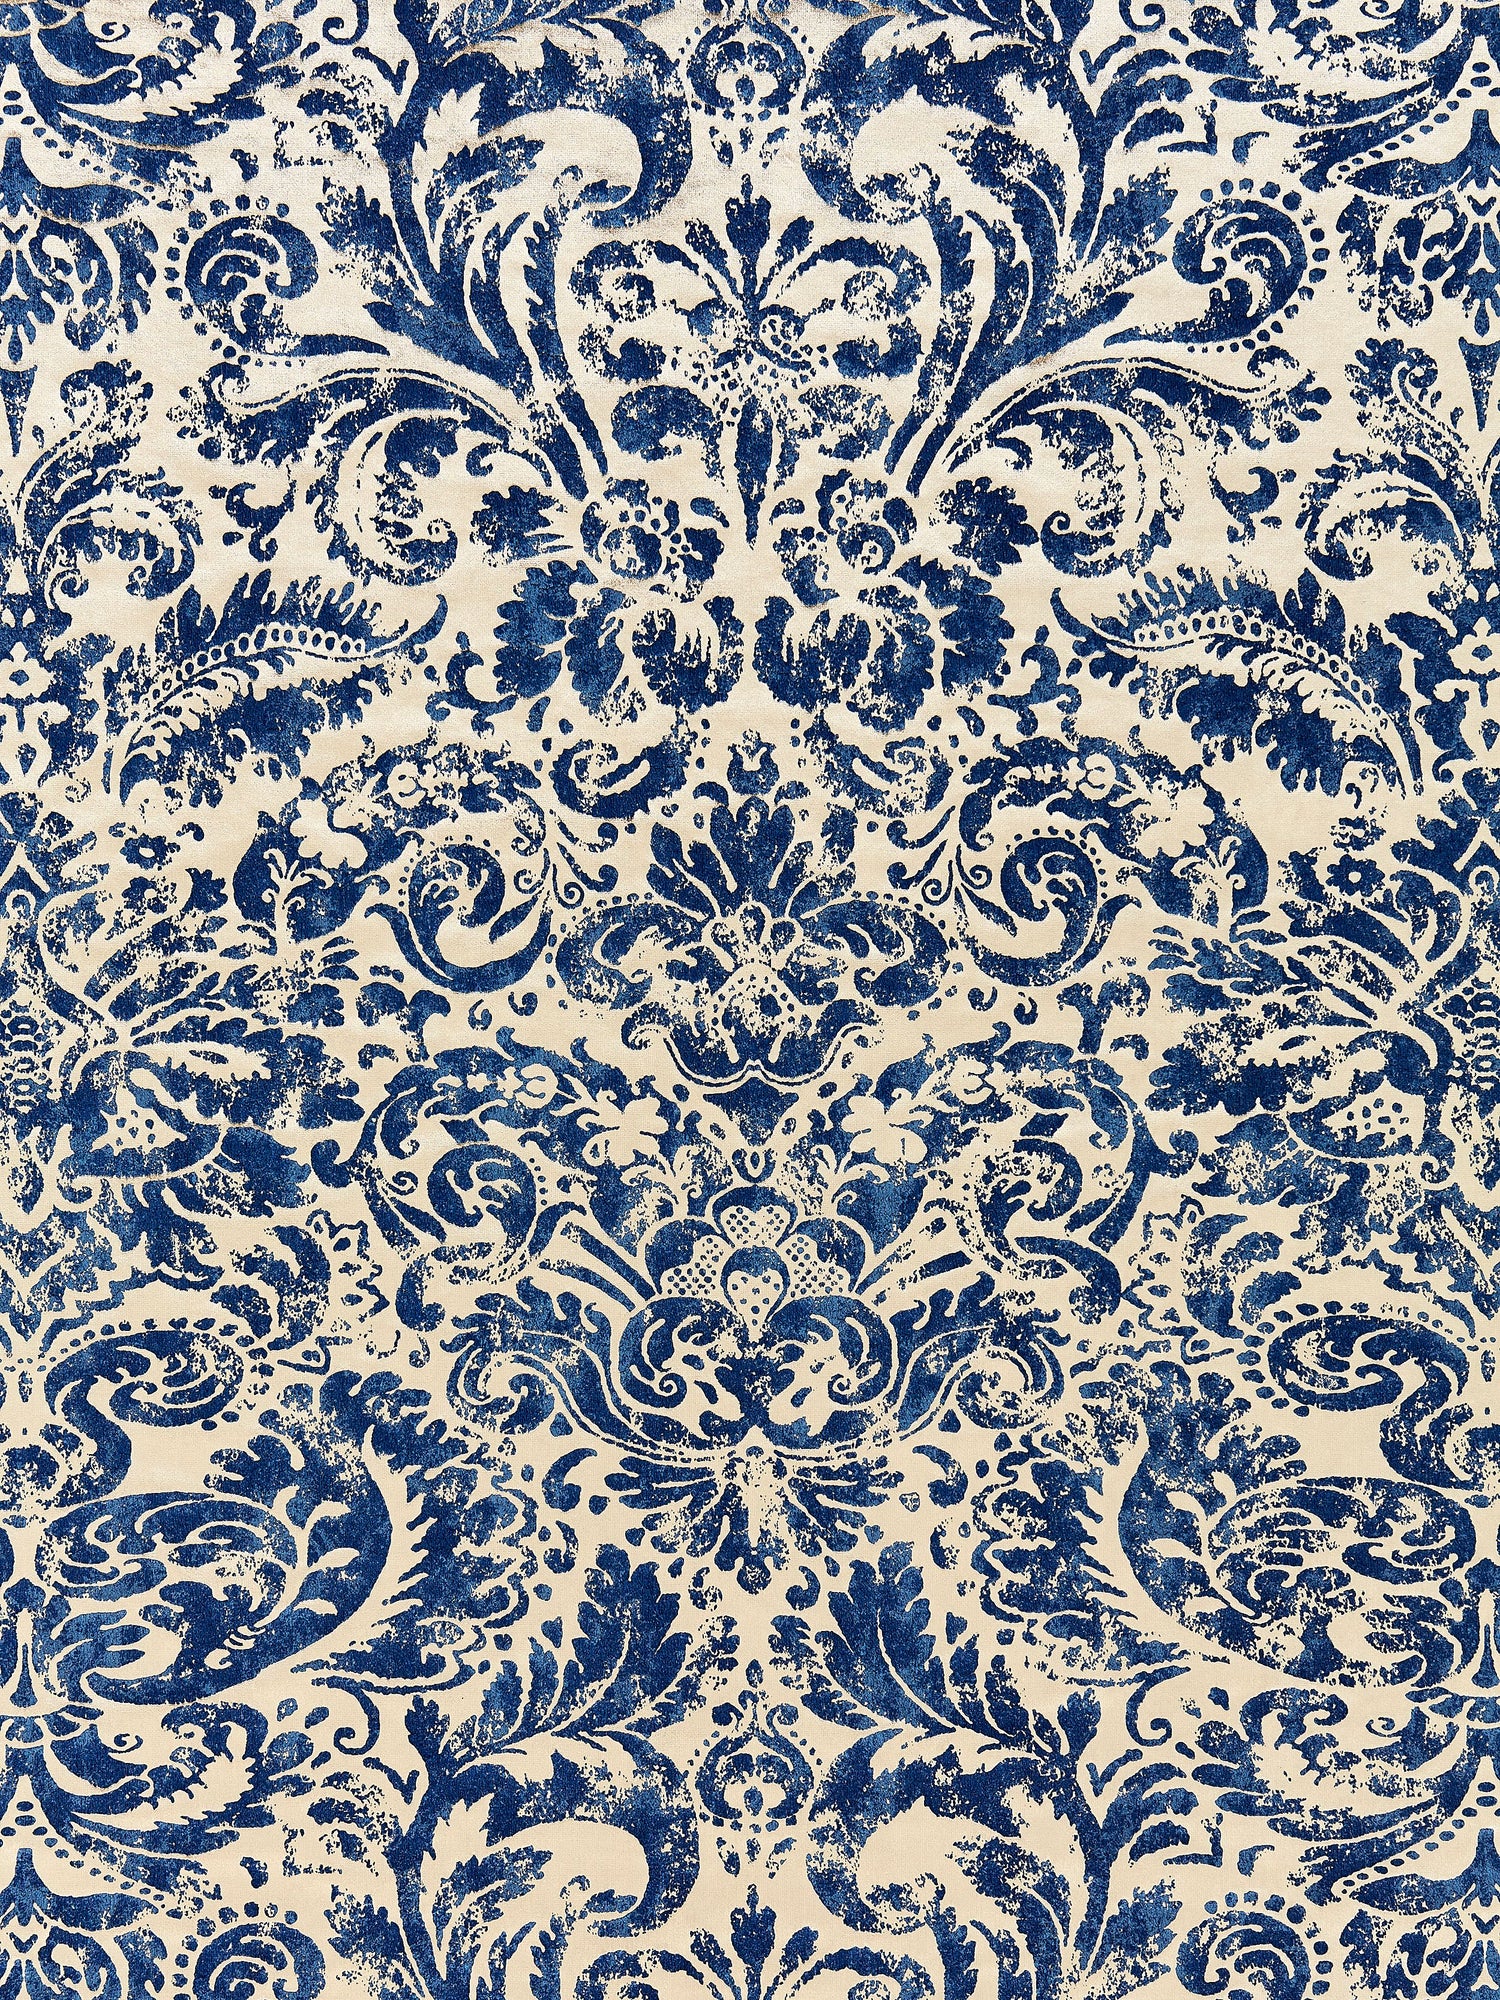 Palladio Velvet Damask fabric in lapis color - pattern number SC 000316592 - by Scalamandre in the Scalamandre Fabrics Book 1 collection